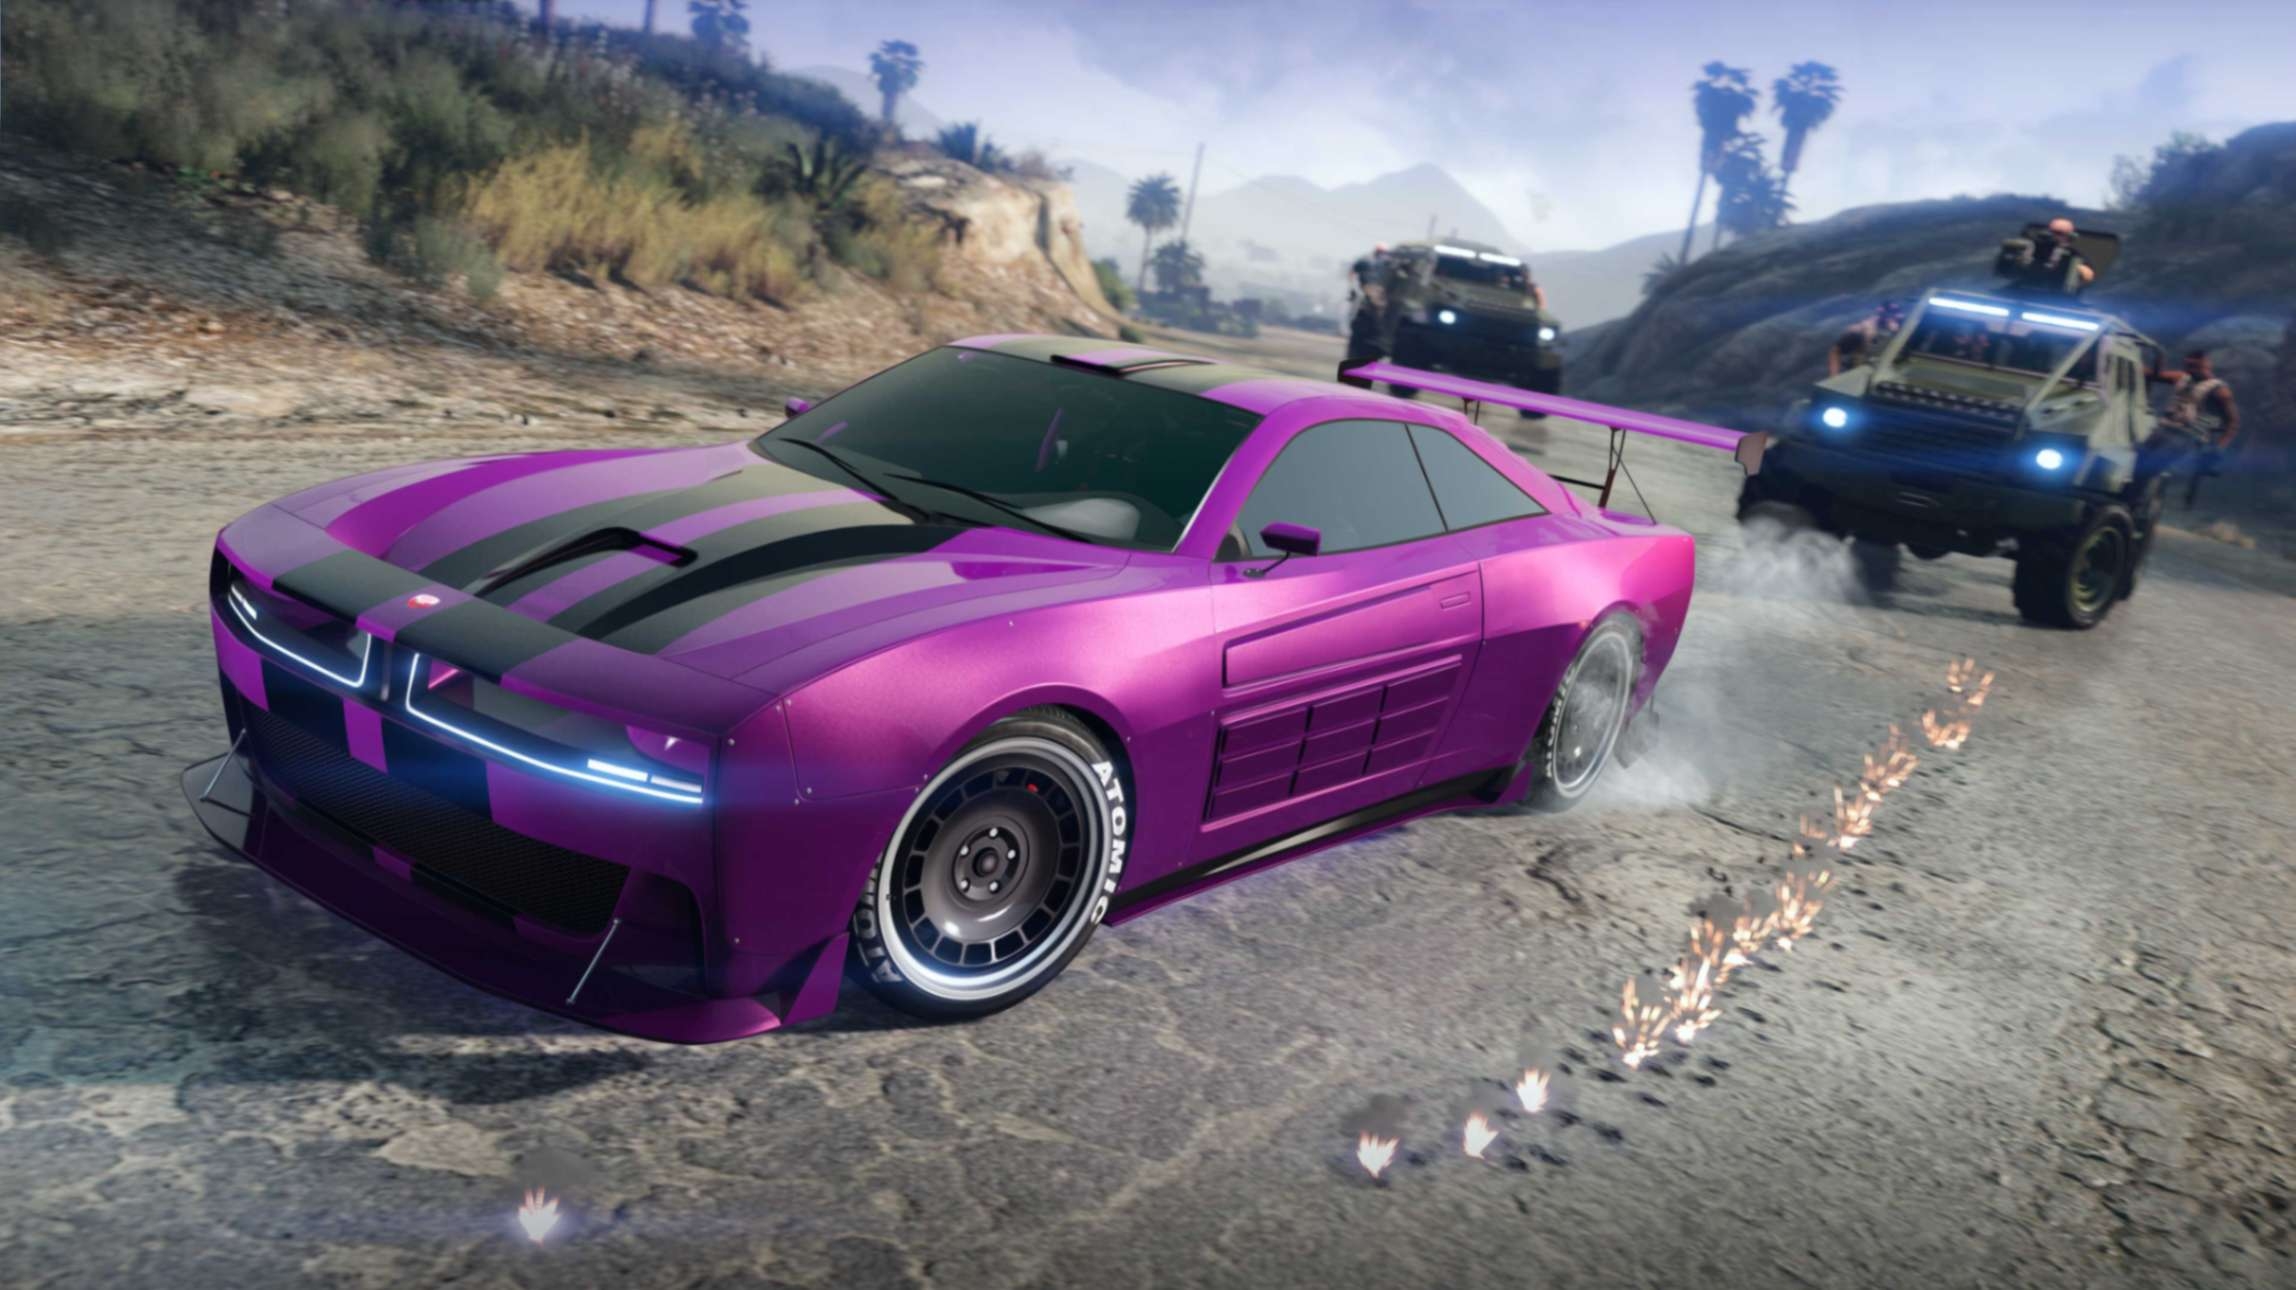 More than 180 cars from GTA Online were removed by Rockstar games